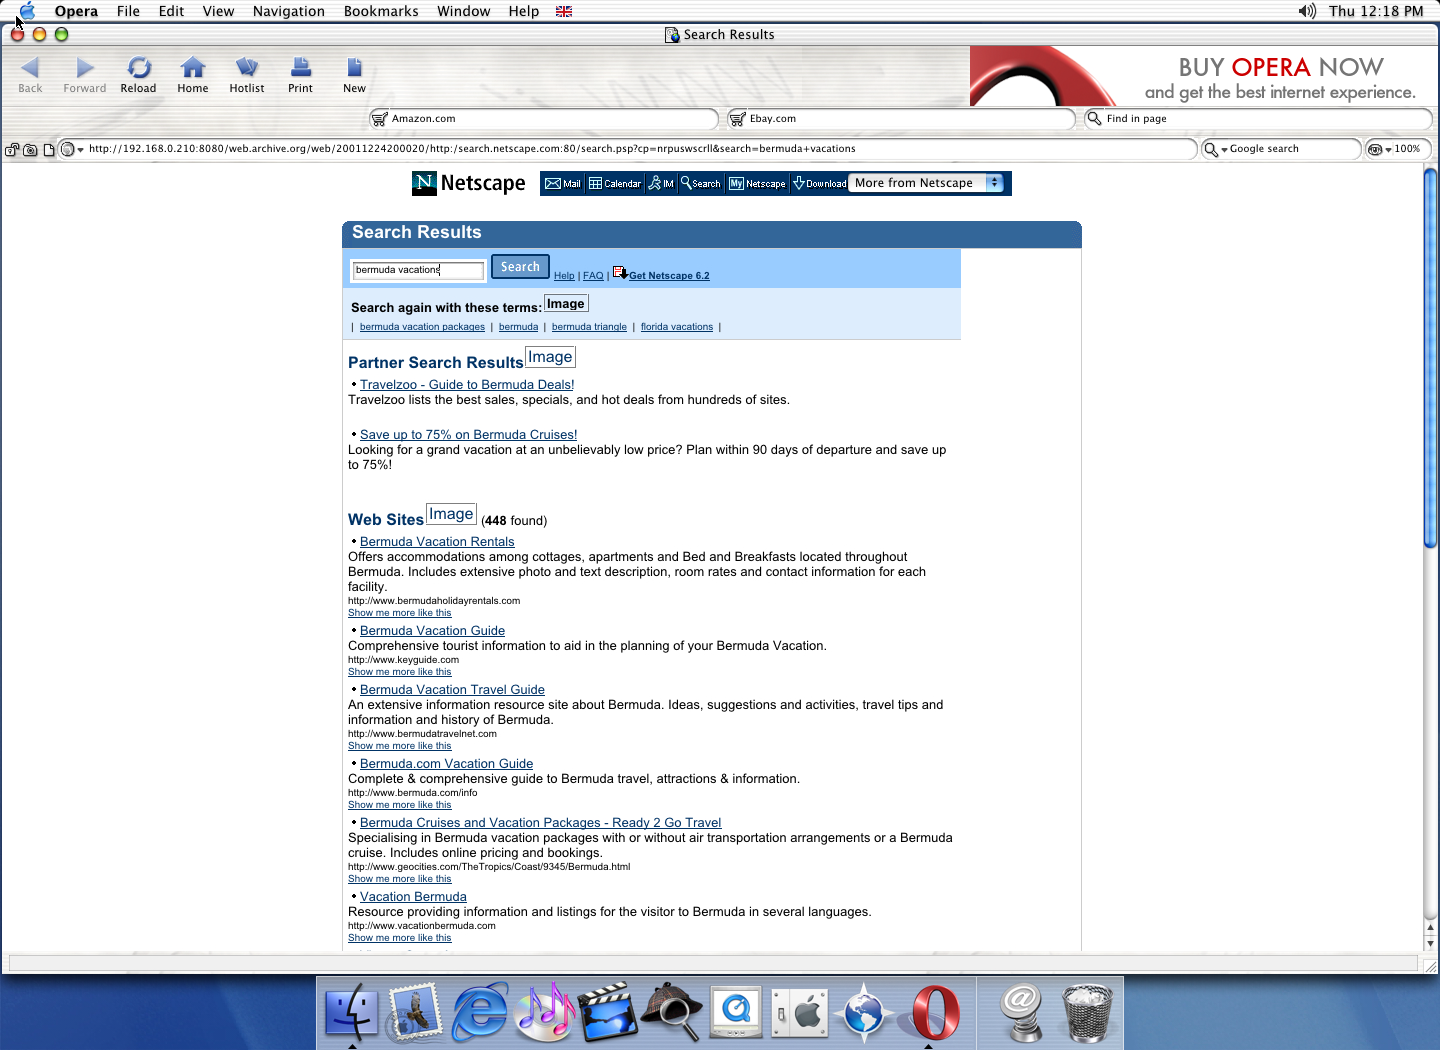 OS X 10.1 PPC with Opera 6.0 displaying a page from Netscape archived at December 24, 2001 at 20:00:20